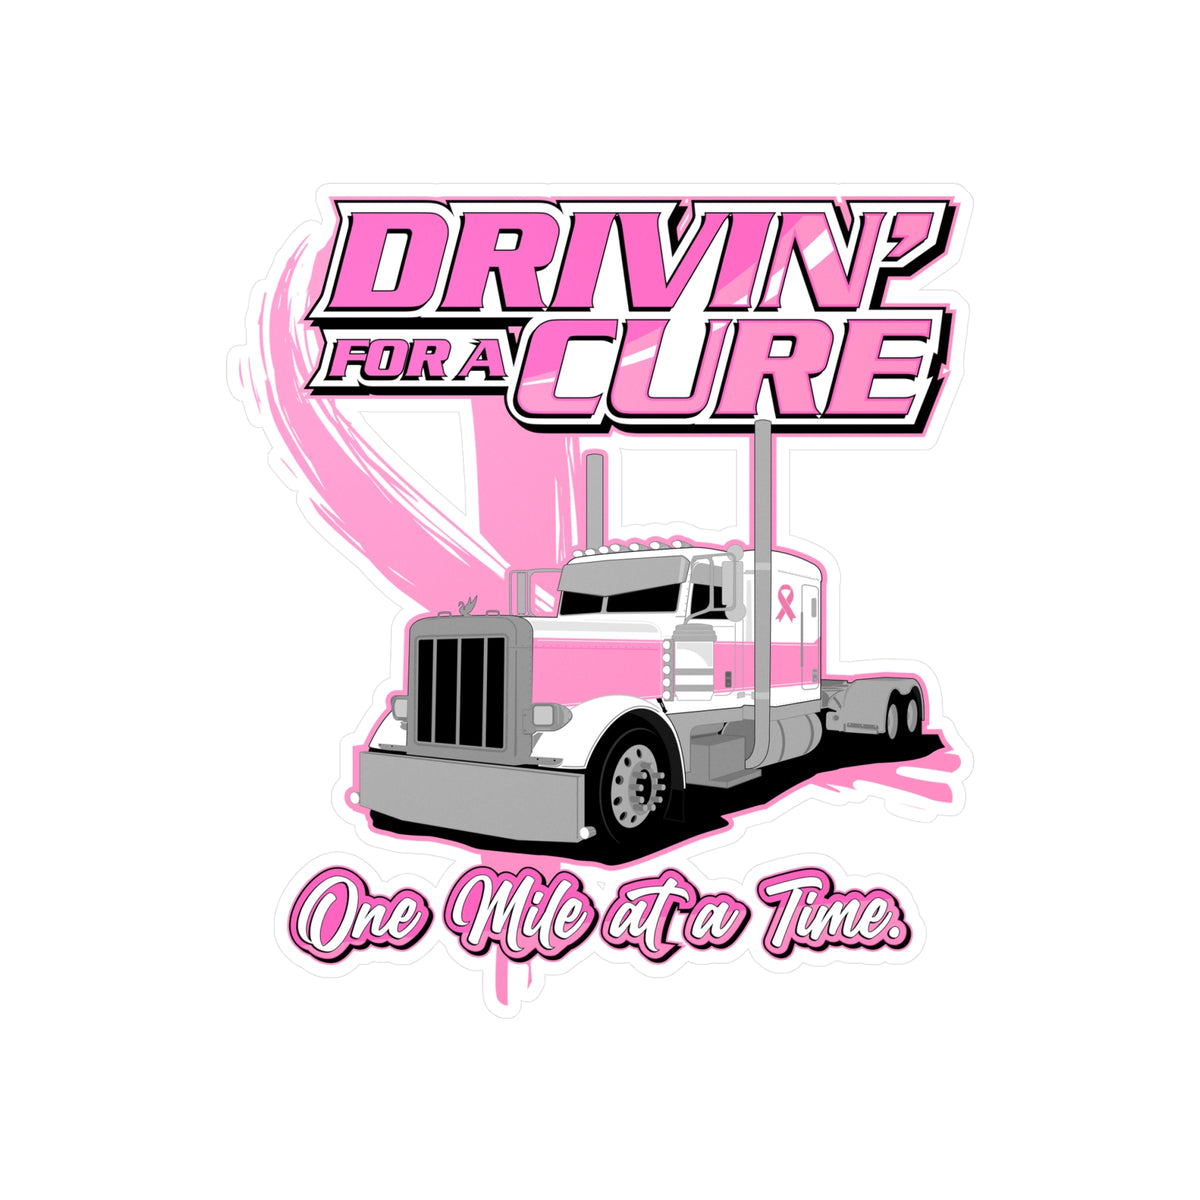 Breast Cancer - Peterbilt - Drivin for a Cure One Mile at a Time - Vinyl Decal - Free Shipping